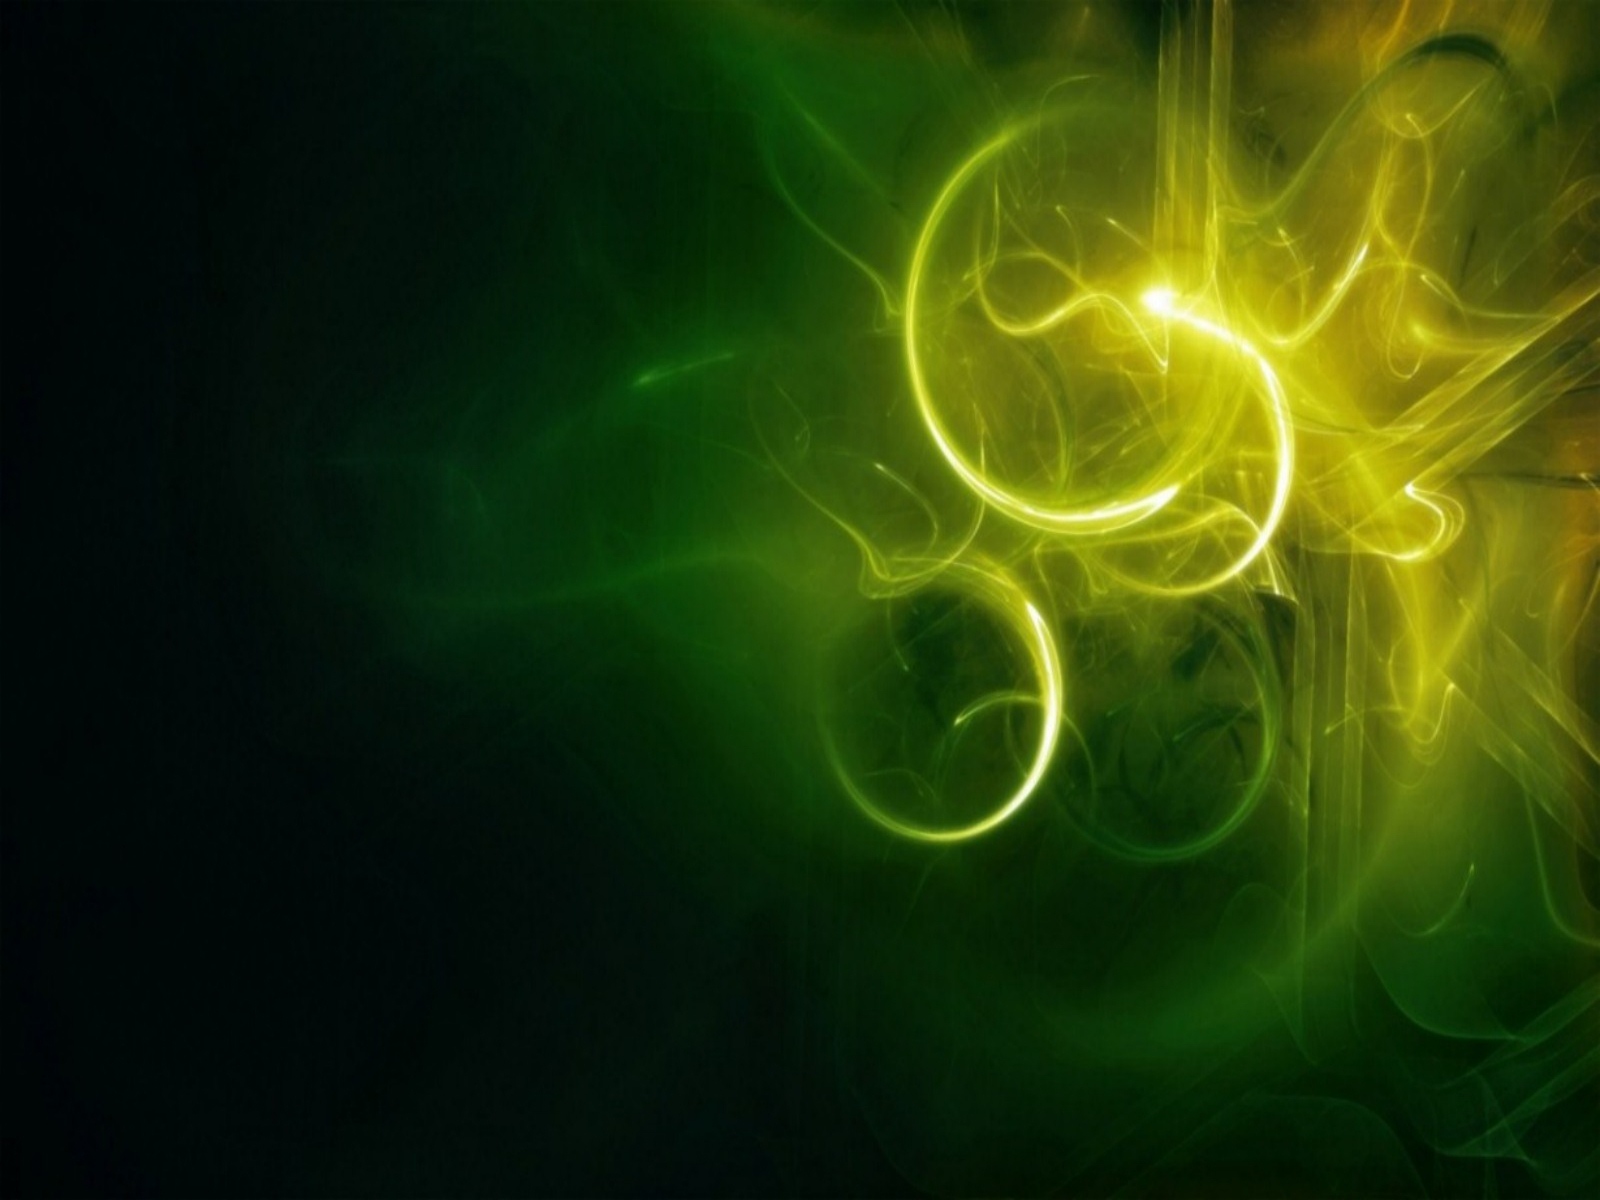 Linux Mint Abstract Wallpaper On Desktop Background HD